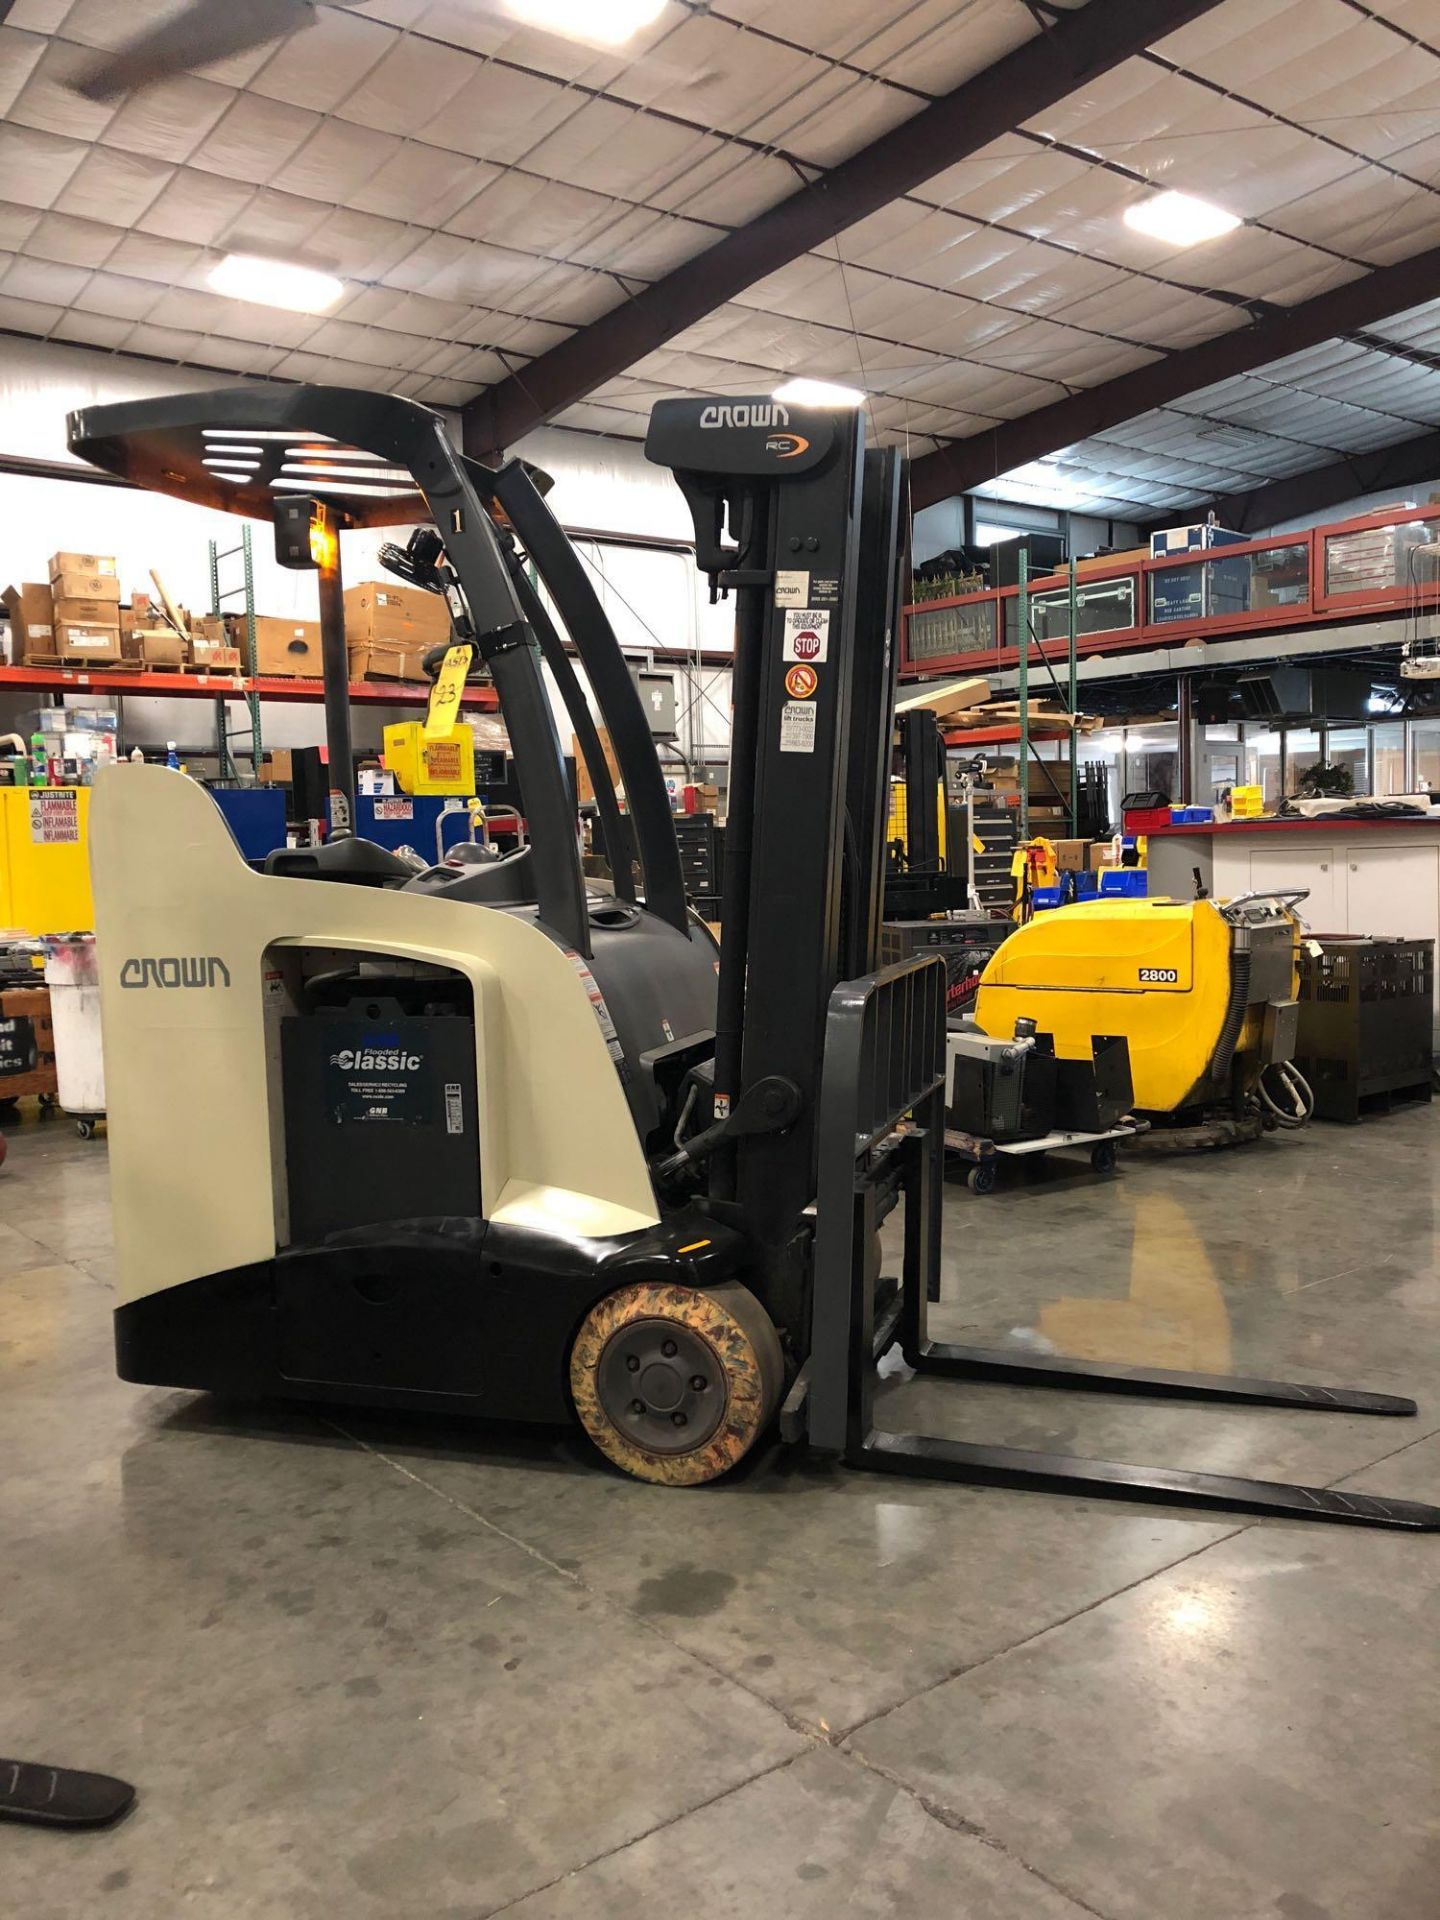 2013 CROWN ELECTRIC FORKLIFT MODEL RC5530-30 - Image 3 of 10